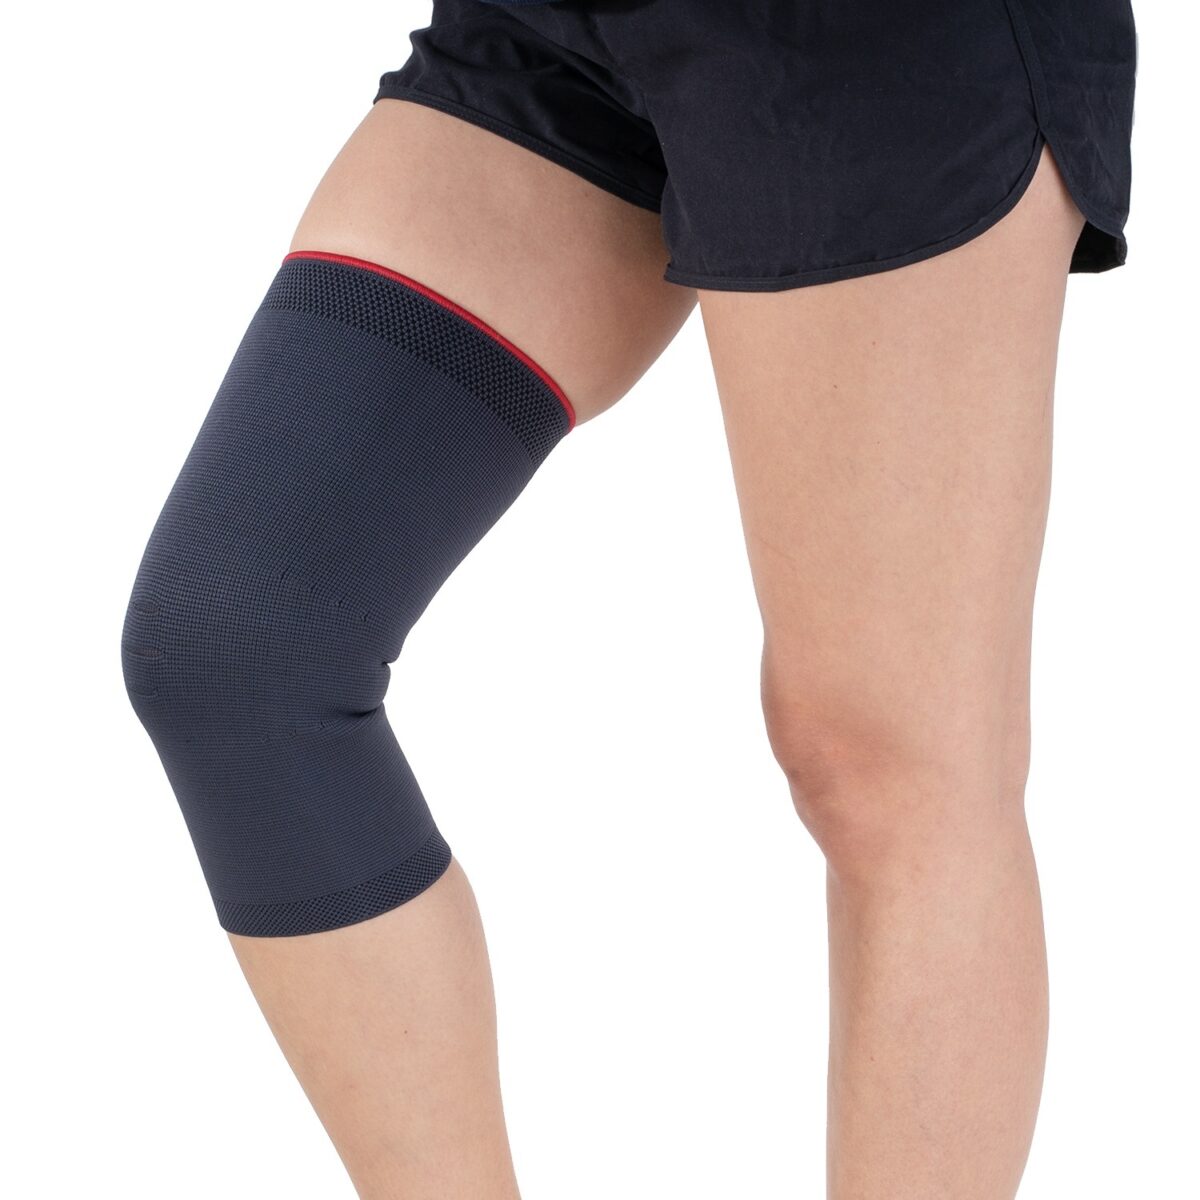 wingmed orthopedic equipments W501 woven knee support 92